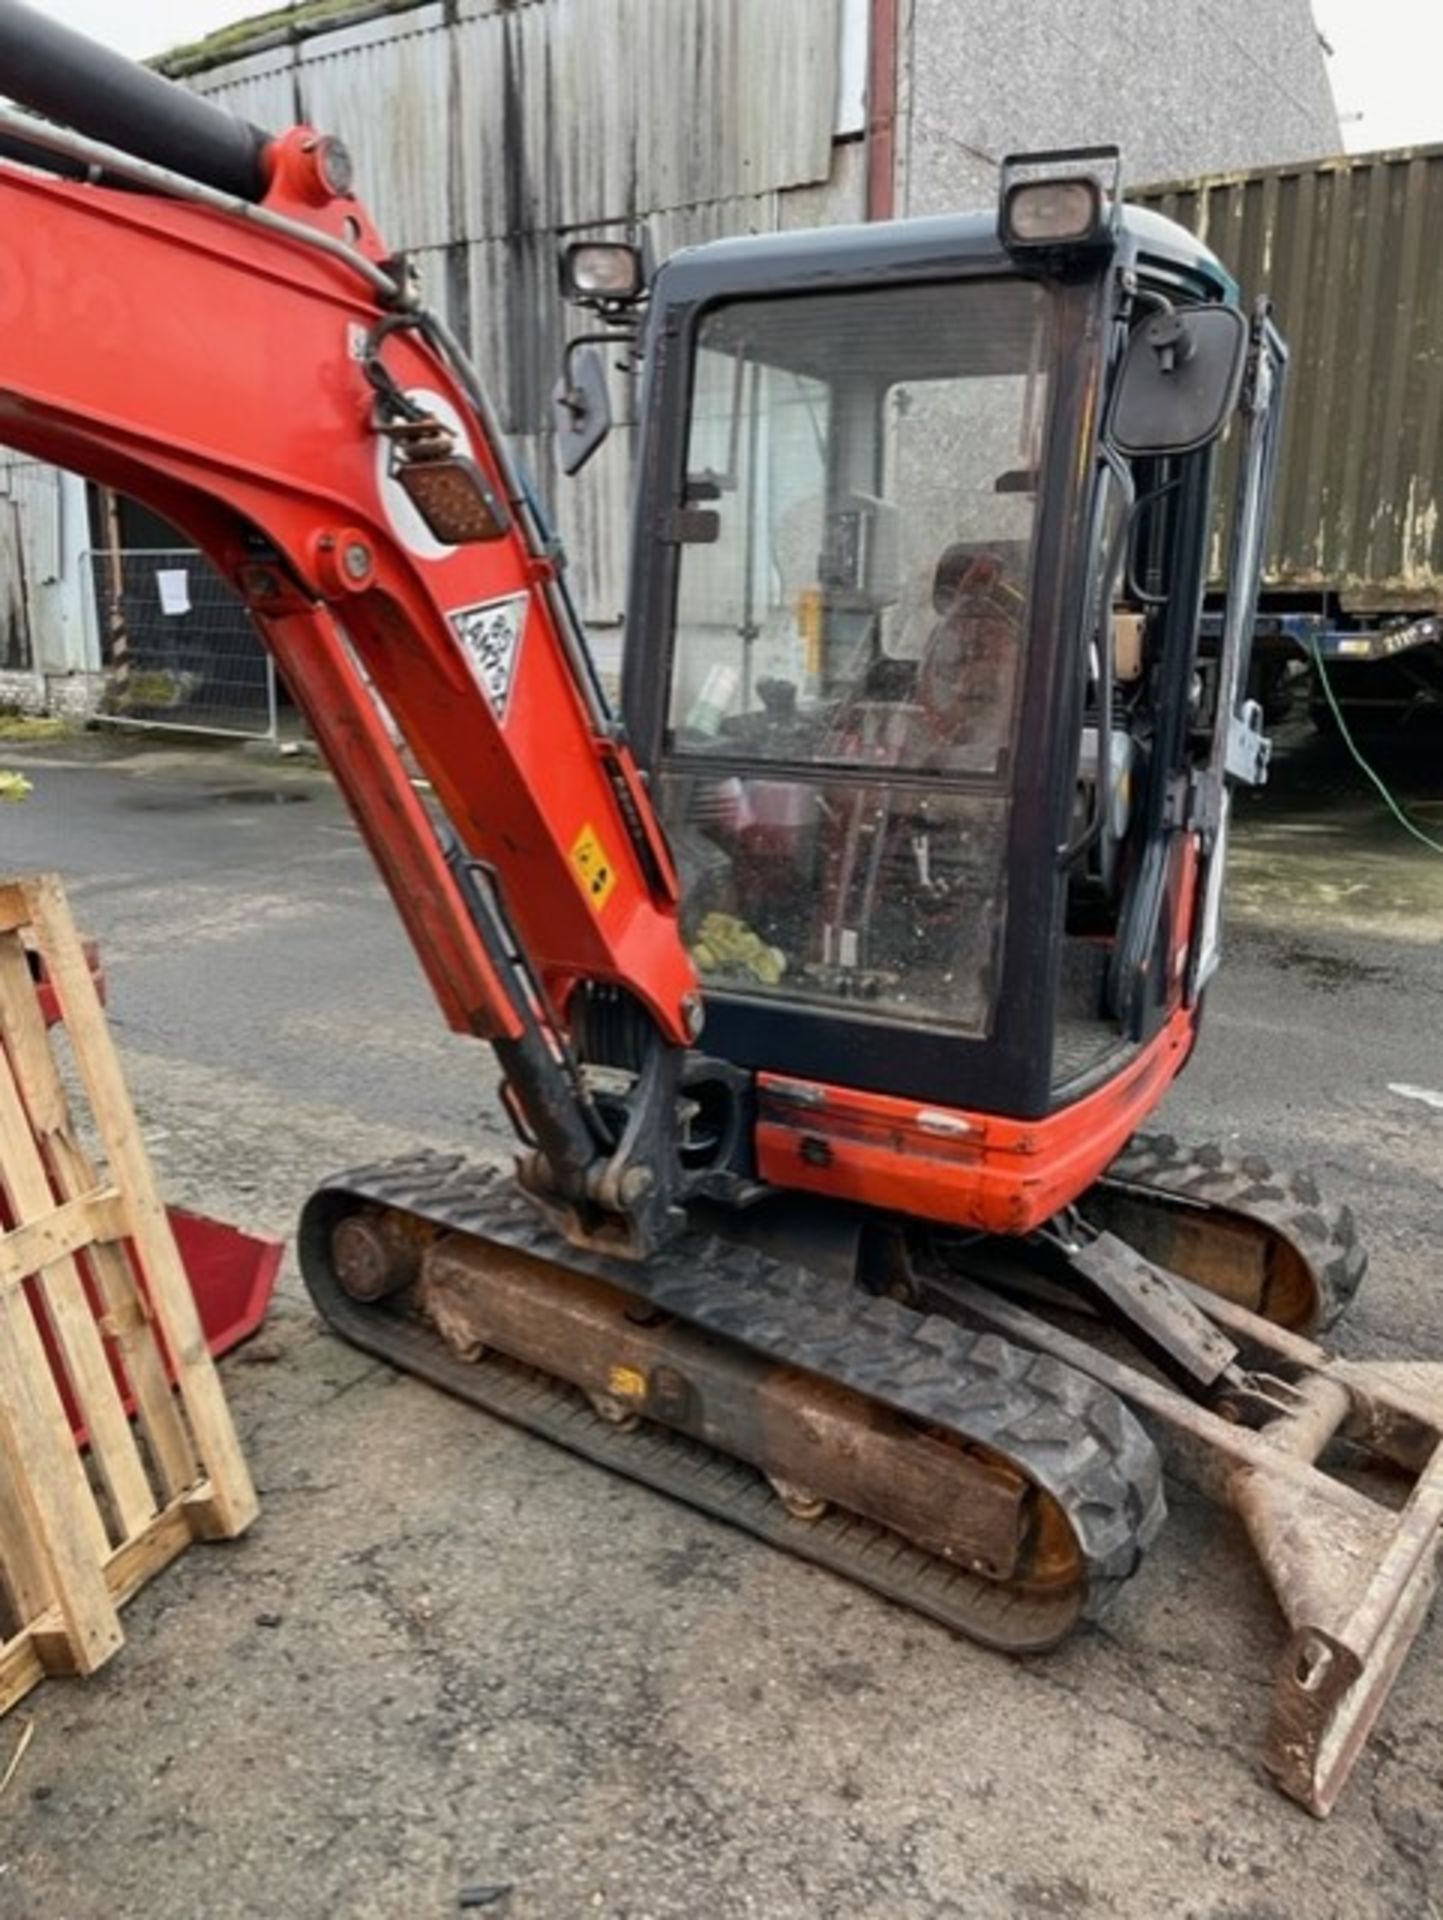 Kubota kx71  3 ton excavator 2015 in very decent condition all working always serviced 3k plus hours - Image 7 of 10